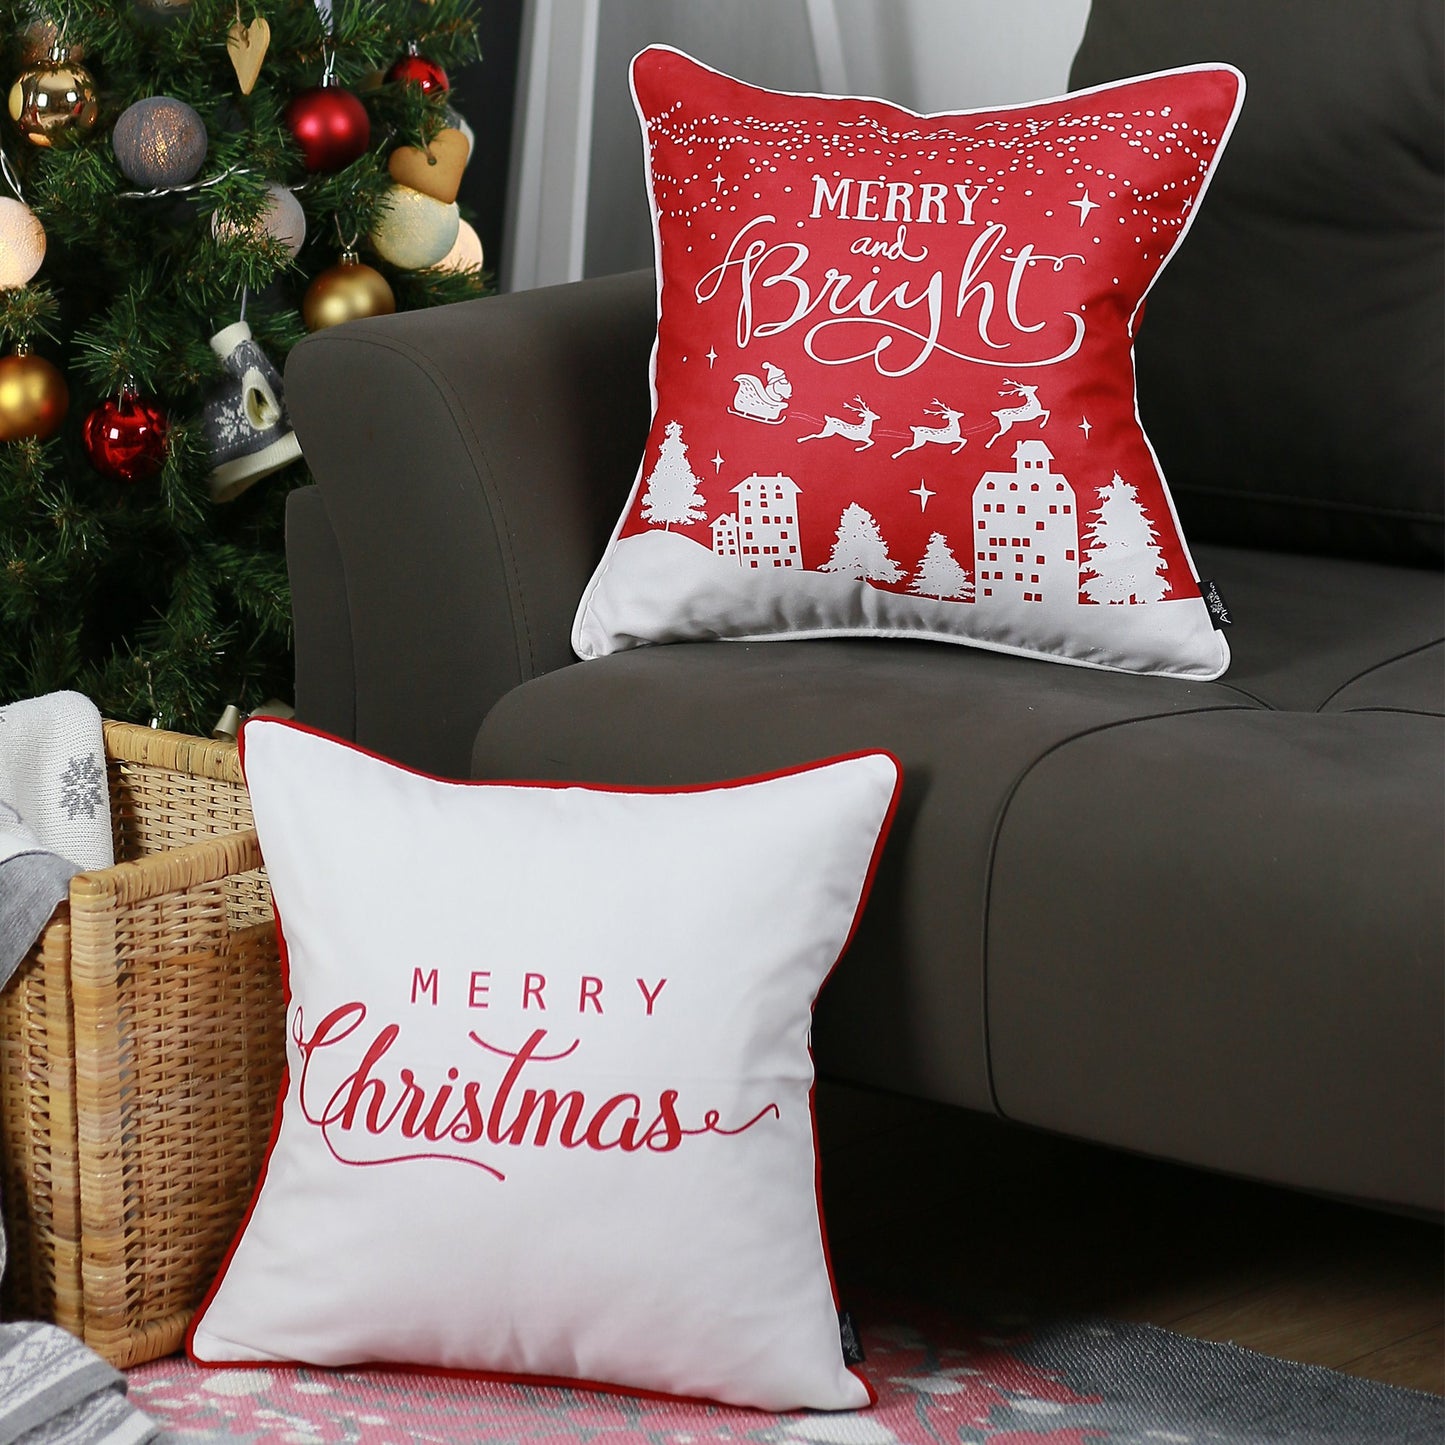 Set of 4 18" Merry Christmas Gift Throw Pillow Cover in Multicolor